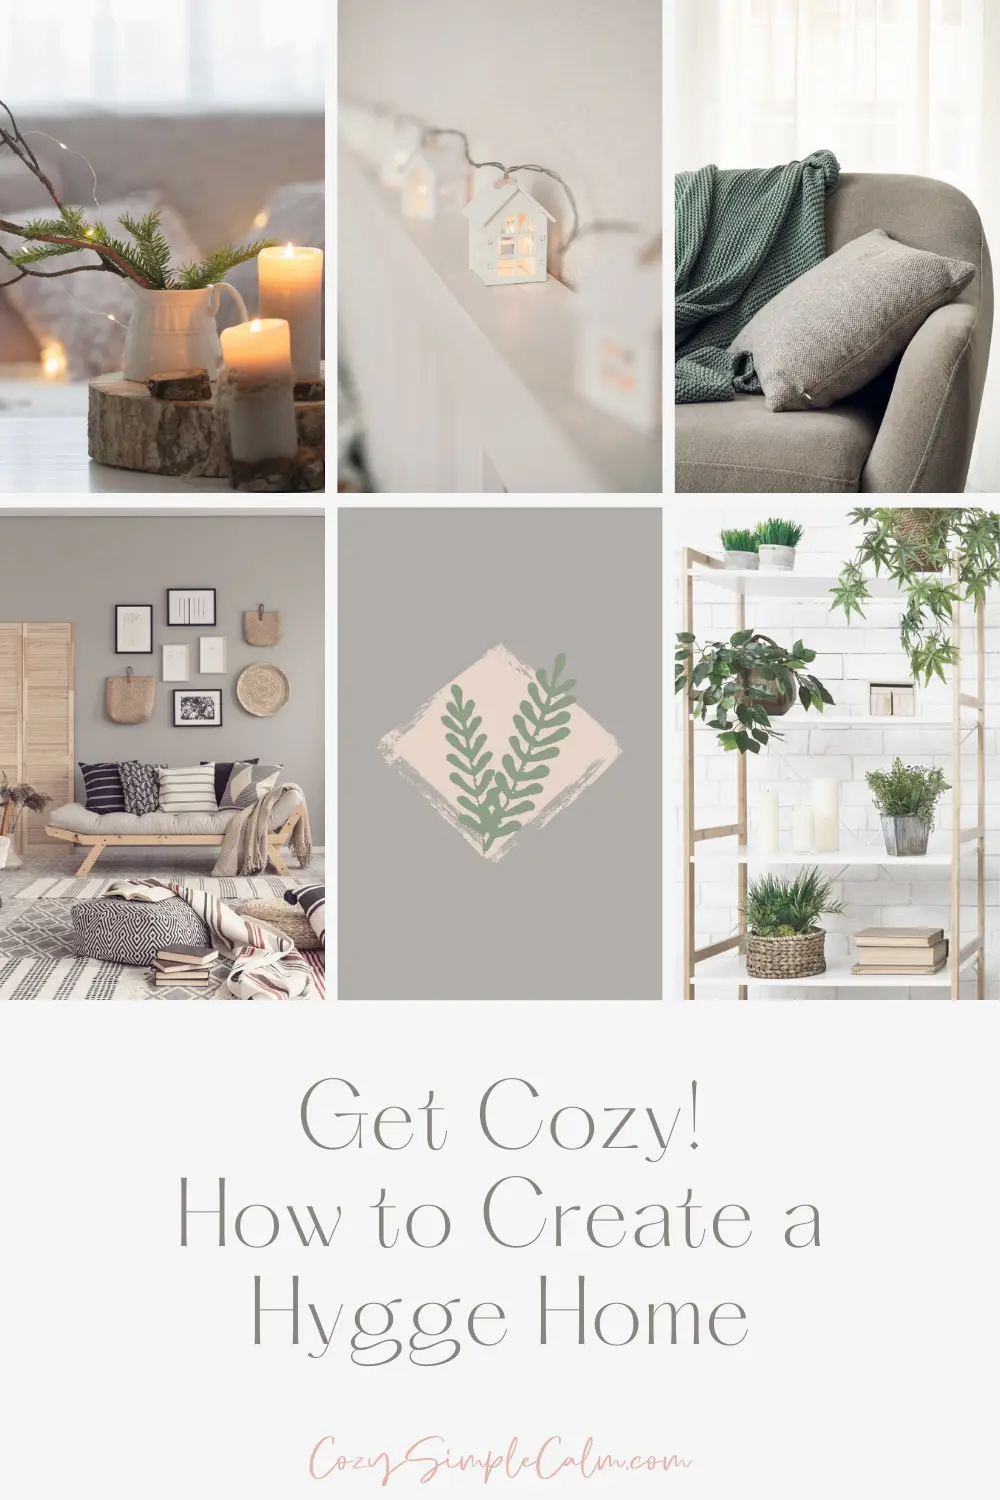 Get Cozy!  How to create a hygge home